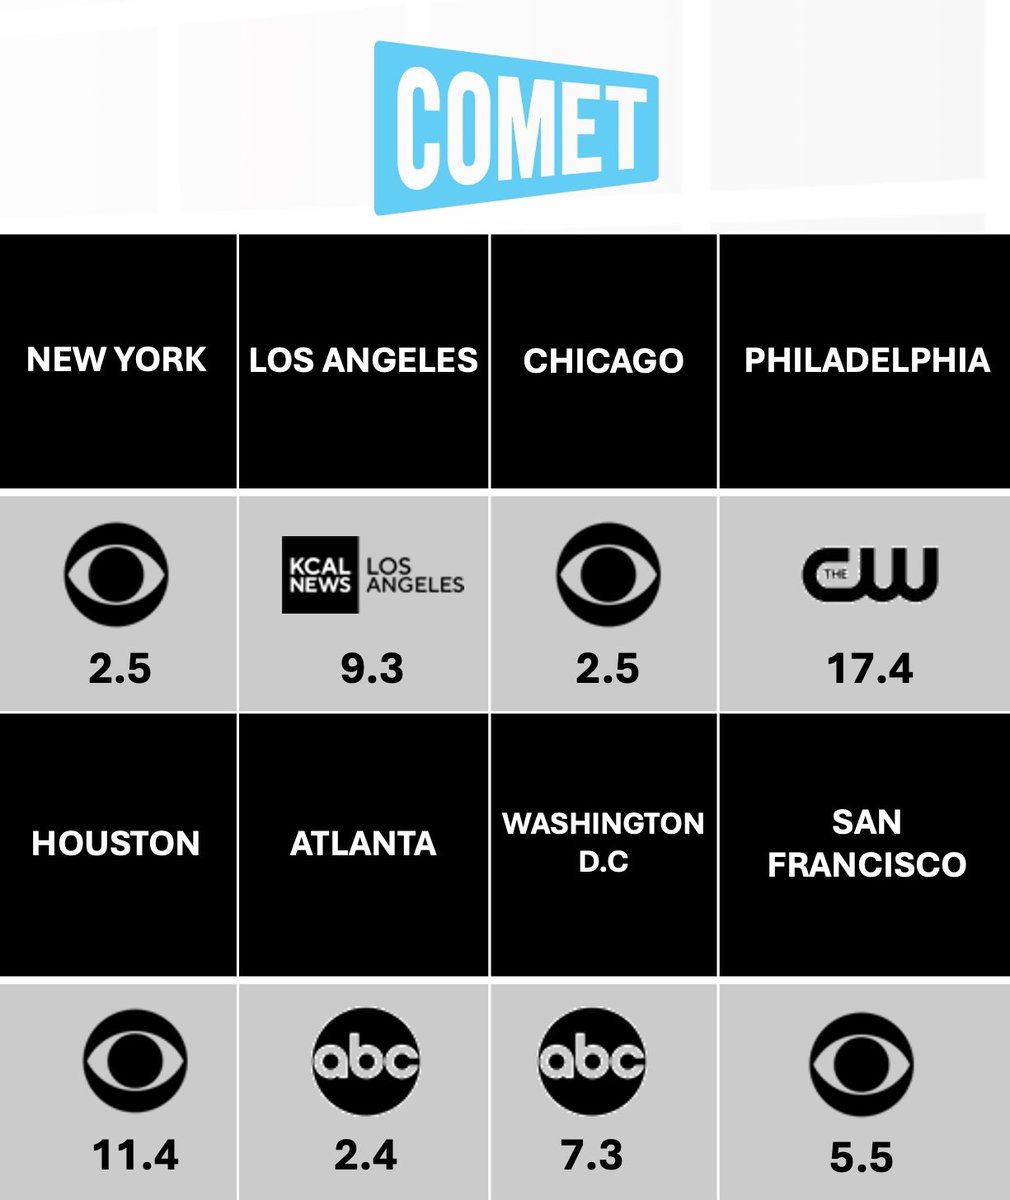 Check out the updated station numbers for COMET across various major cities! #CometTV